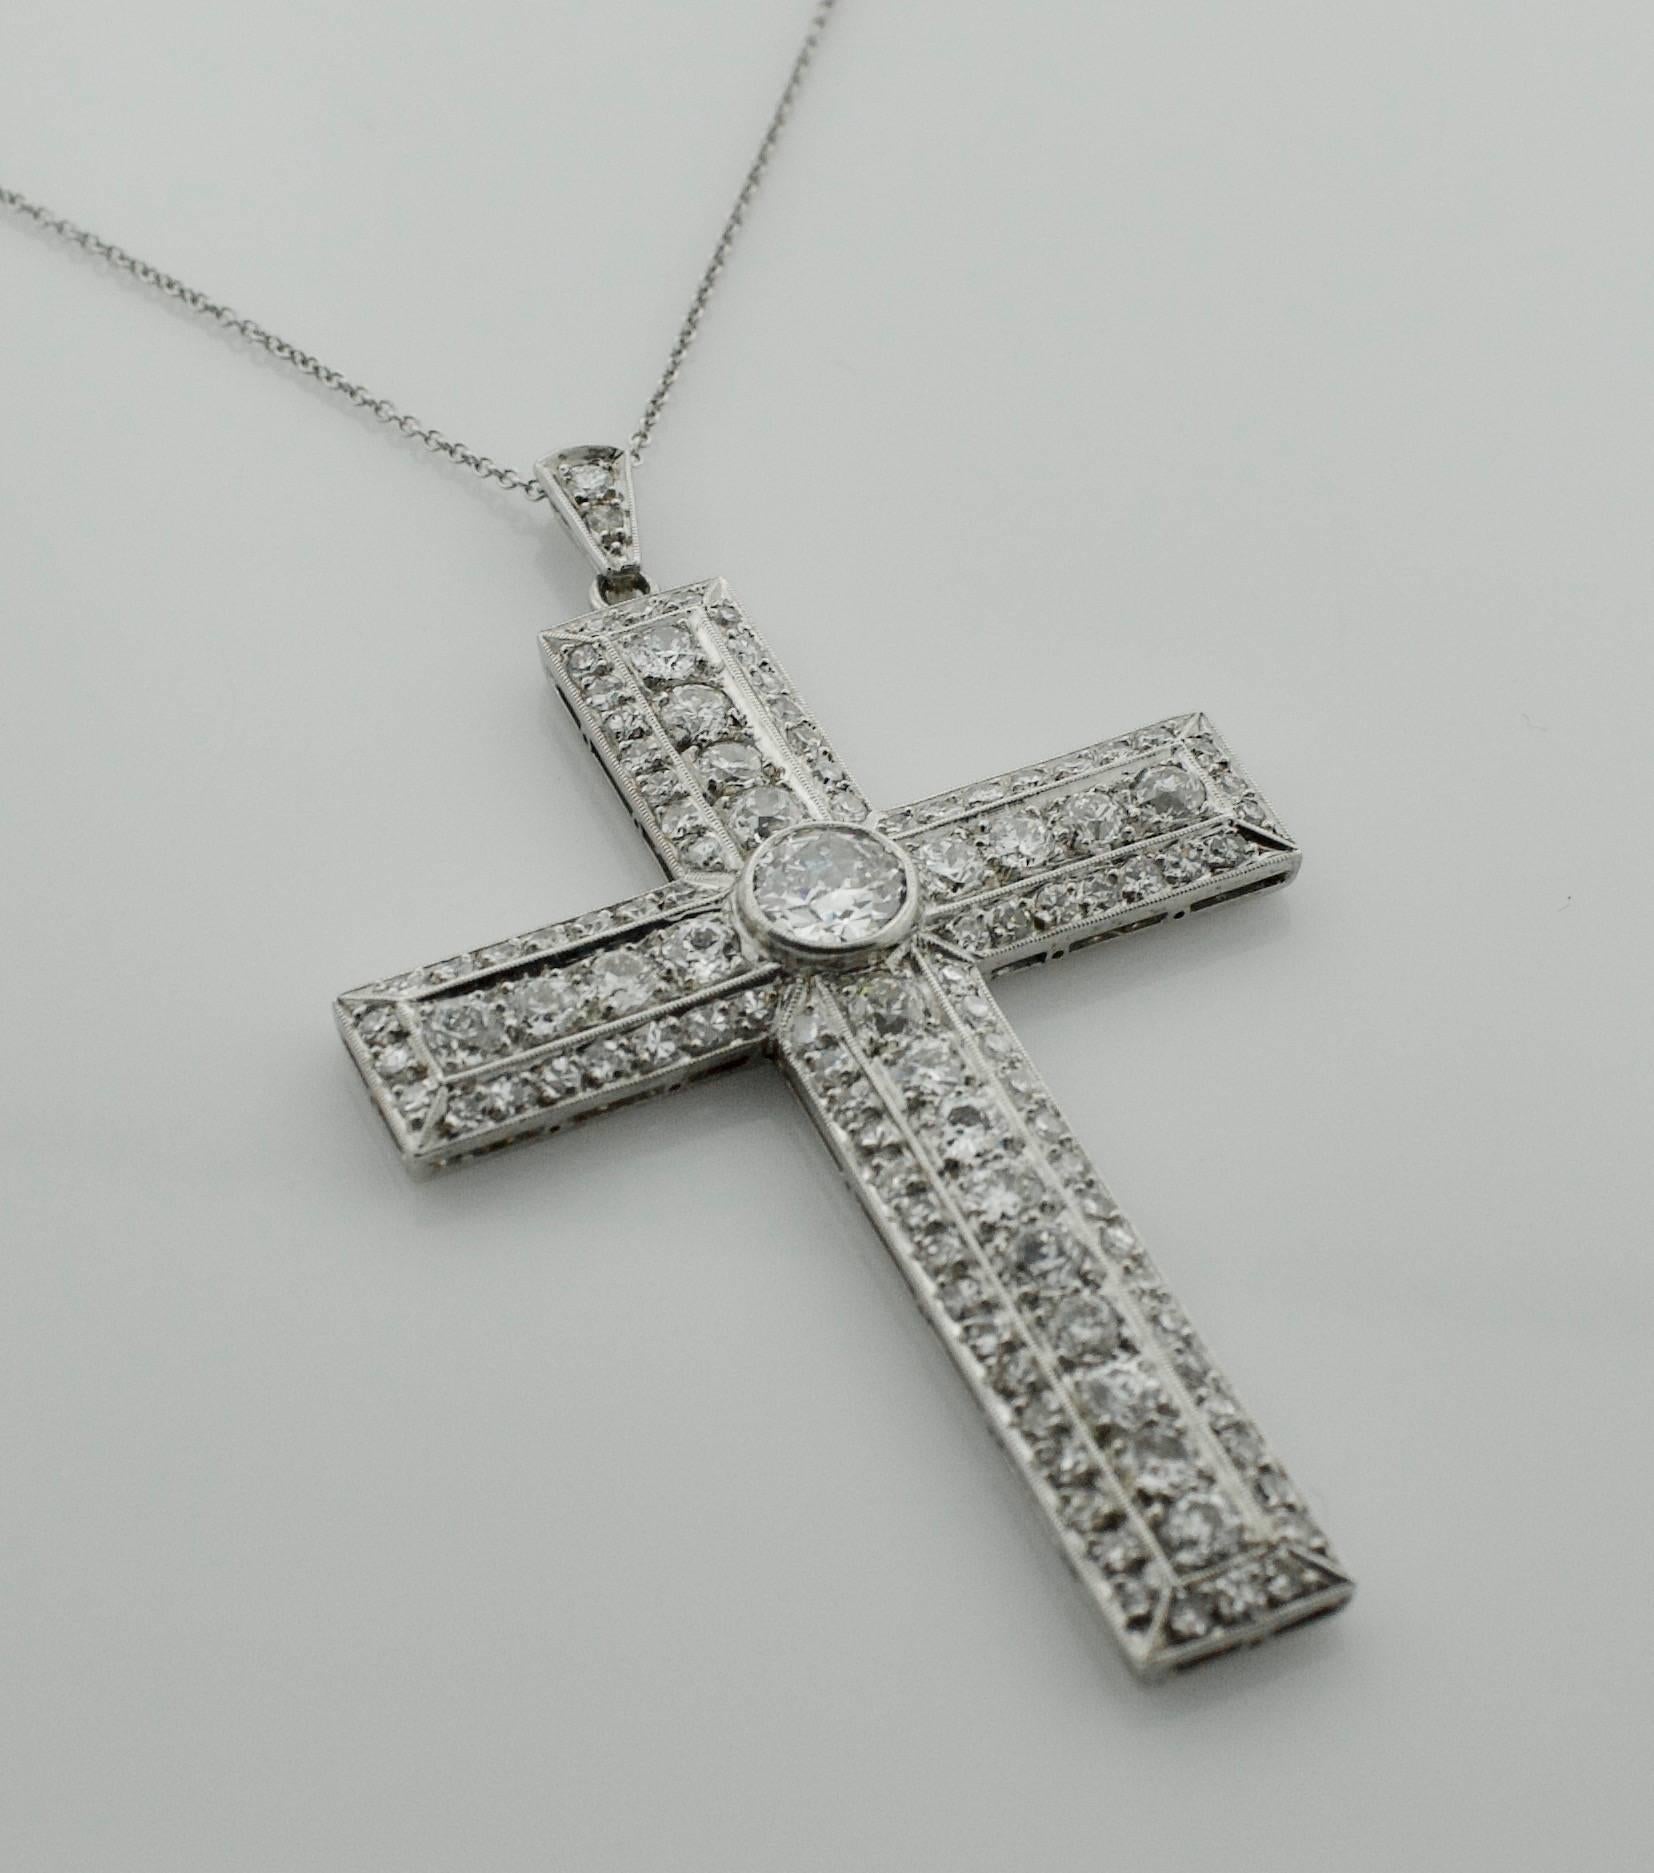 Platinum Diamond Cross Necklace Circa 1930's 5.00 carats. 
.90 Old European cut Diamond weighing .90 GH SI1 approximately 
One Hundred and Two Old European cut and round Diamonds weighing 4..10 carats approximately GH VS2 - SI1
Hanging from a simple